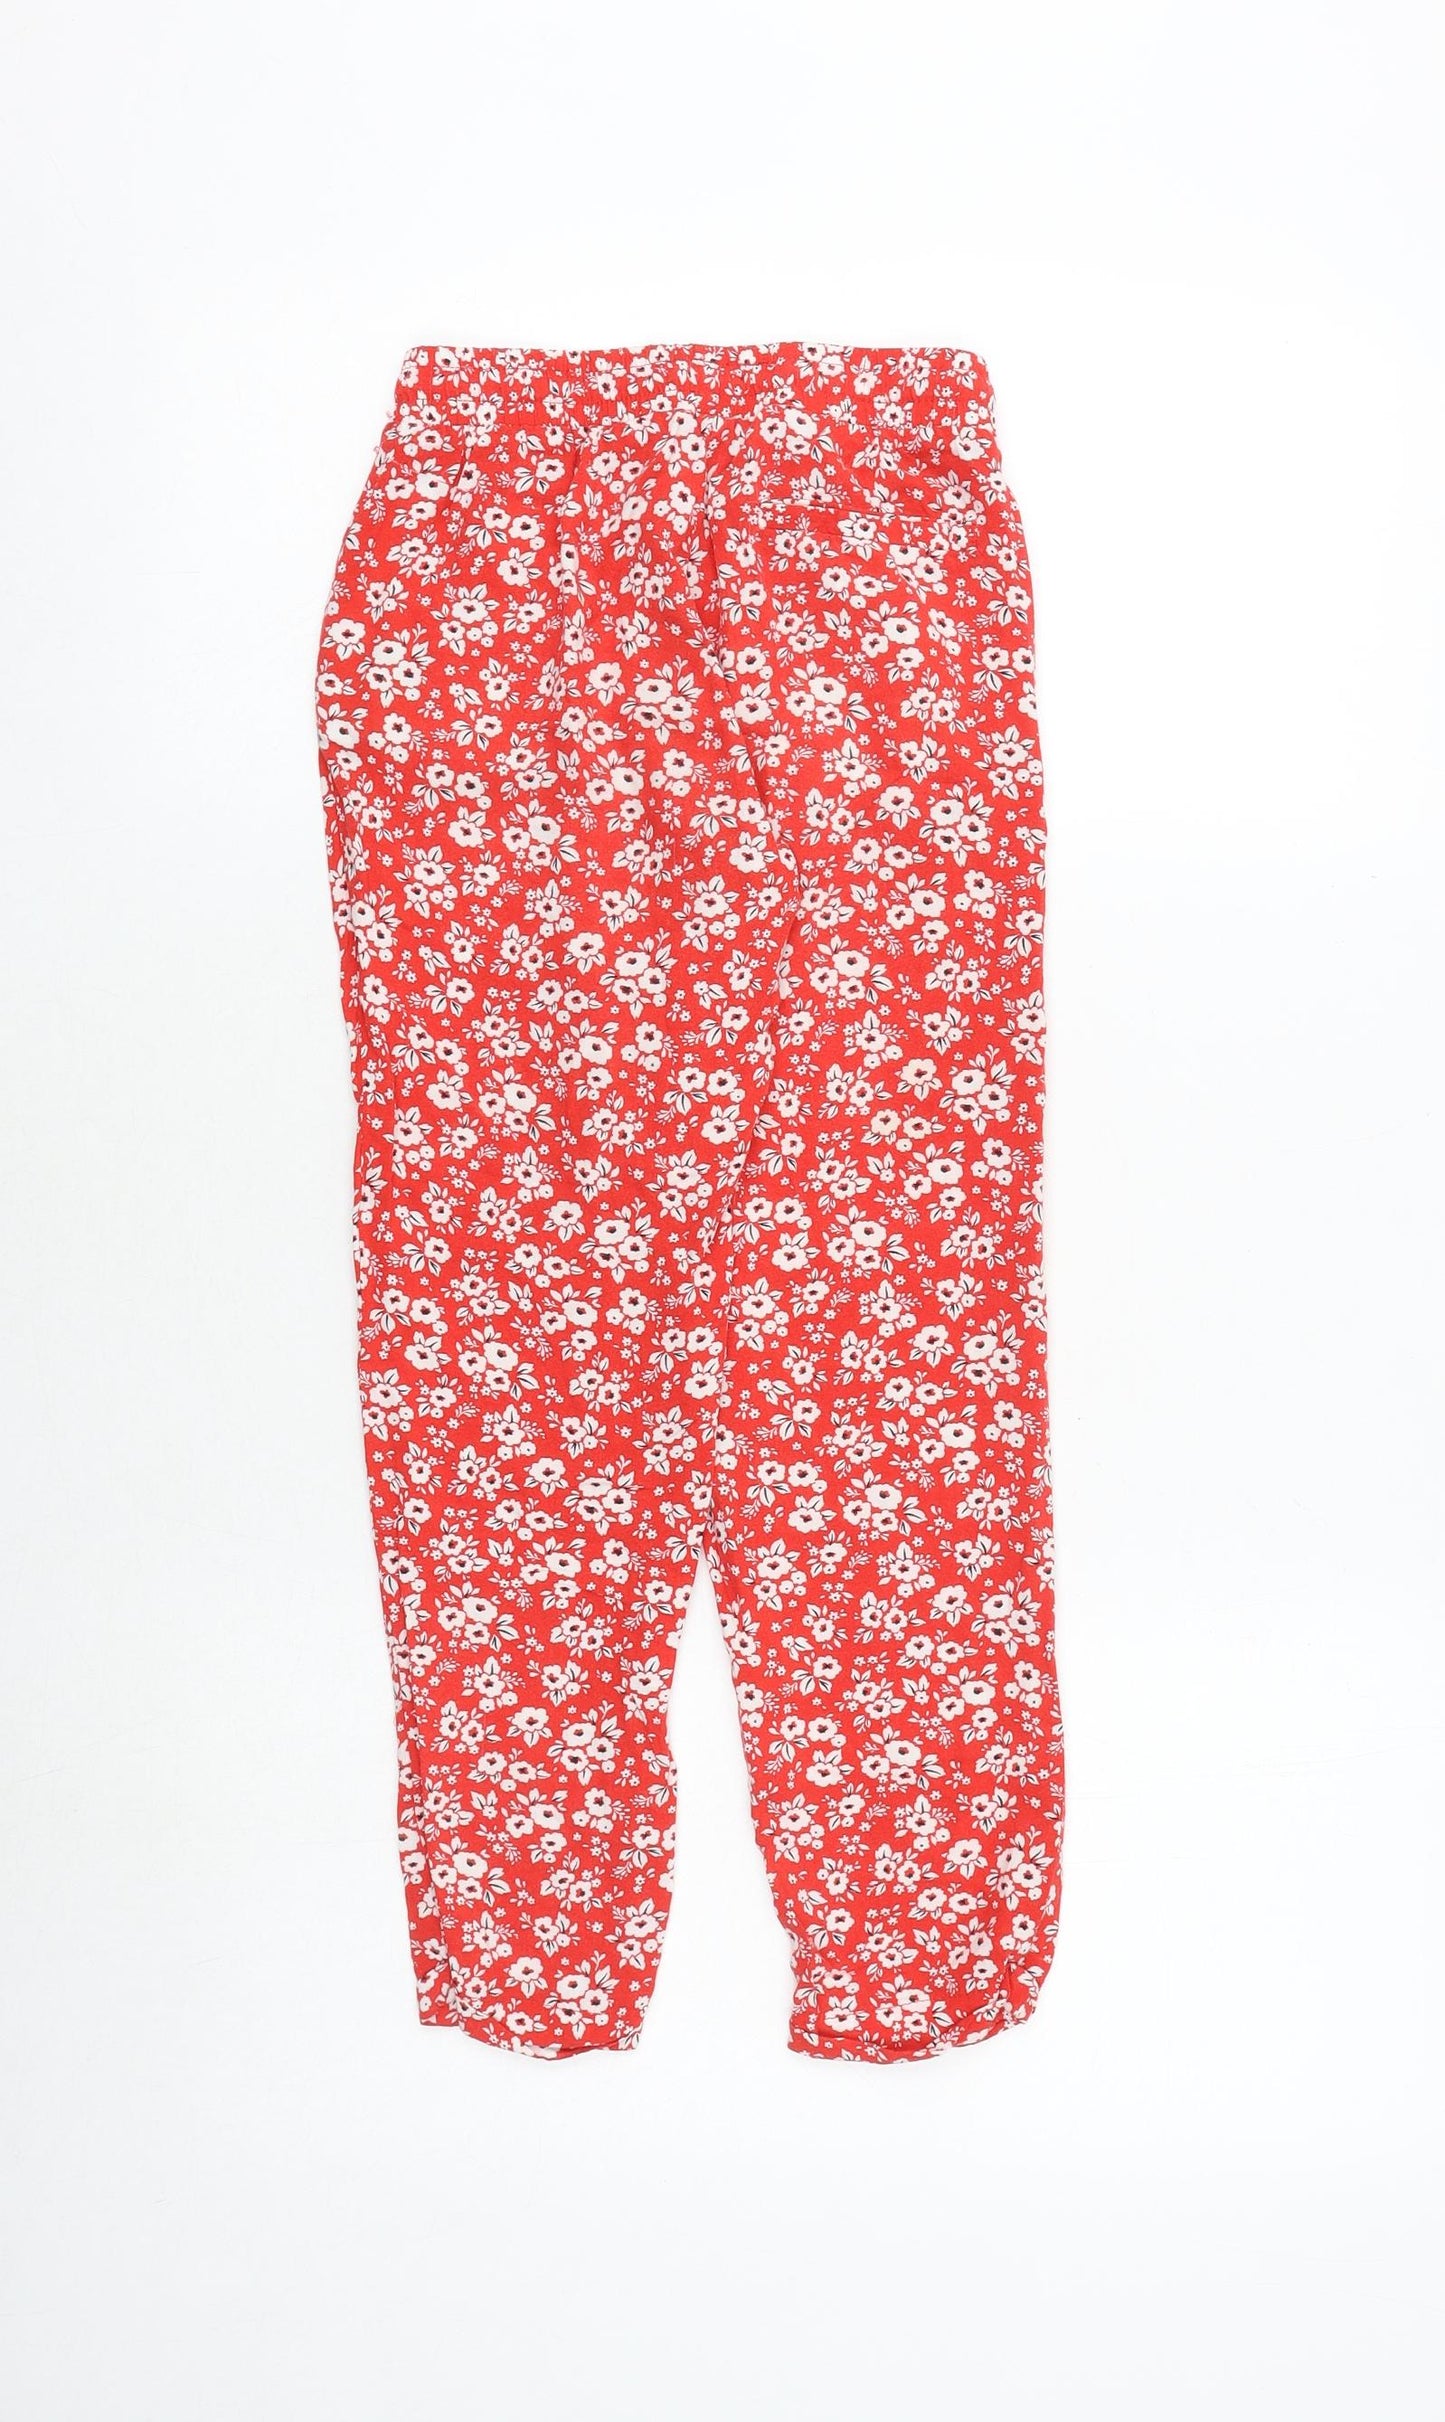 Kiabi Girls Red Floral Viscose Jogger Trousers Size 9 Years Regular Pullover